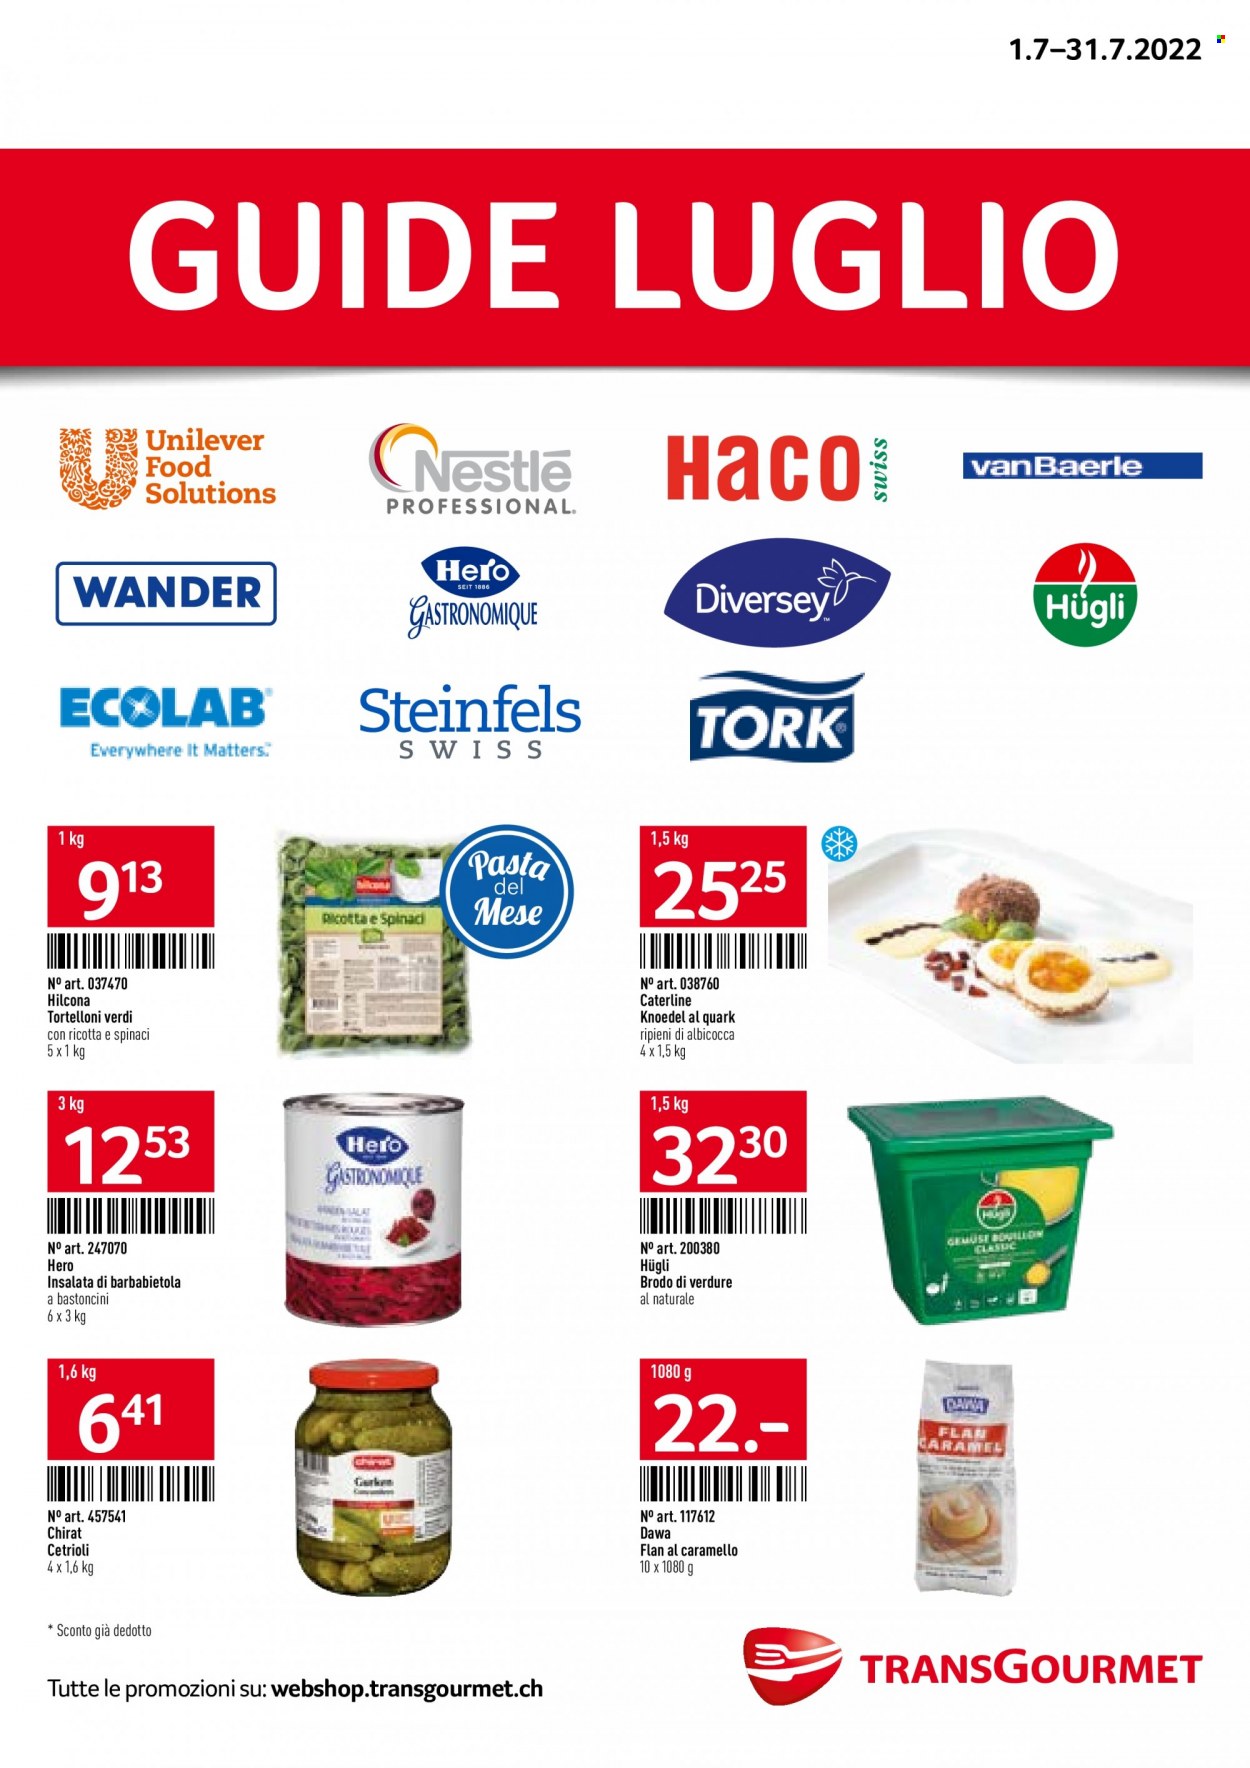 Catalogue TransGourmet - 1.7.2022 - 31.7.2022. Page 1.